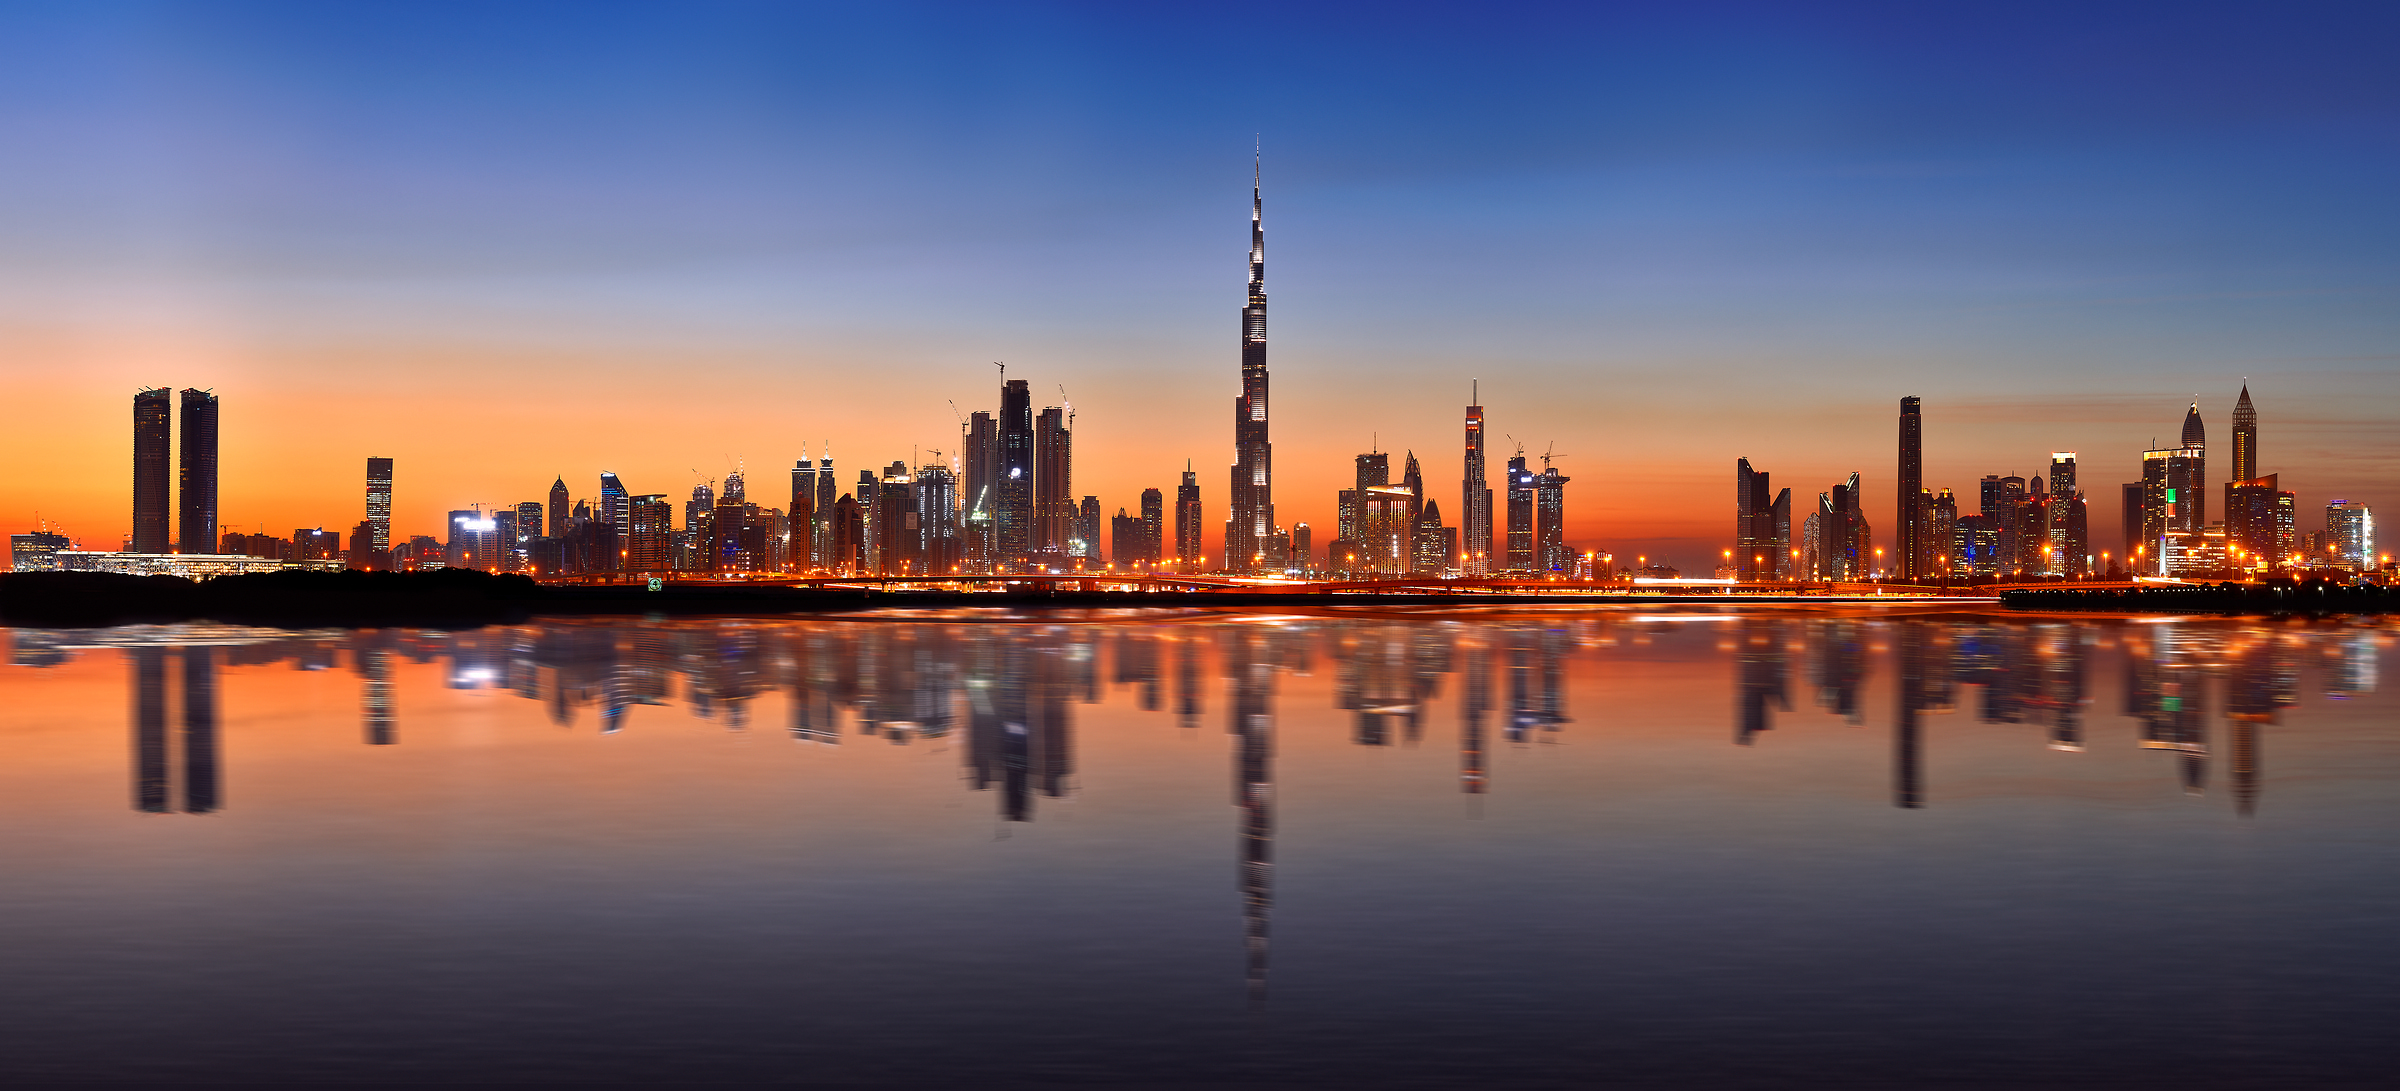 273 megapixels! A very high resolution, large-format VAST photo print of the Dubai skyline at sunset; cityscape photograph created by Chris Collacott in Dubai, United Arab Emirates